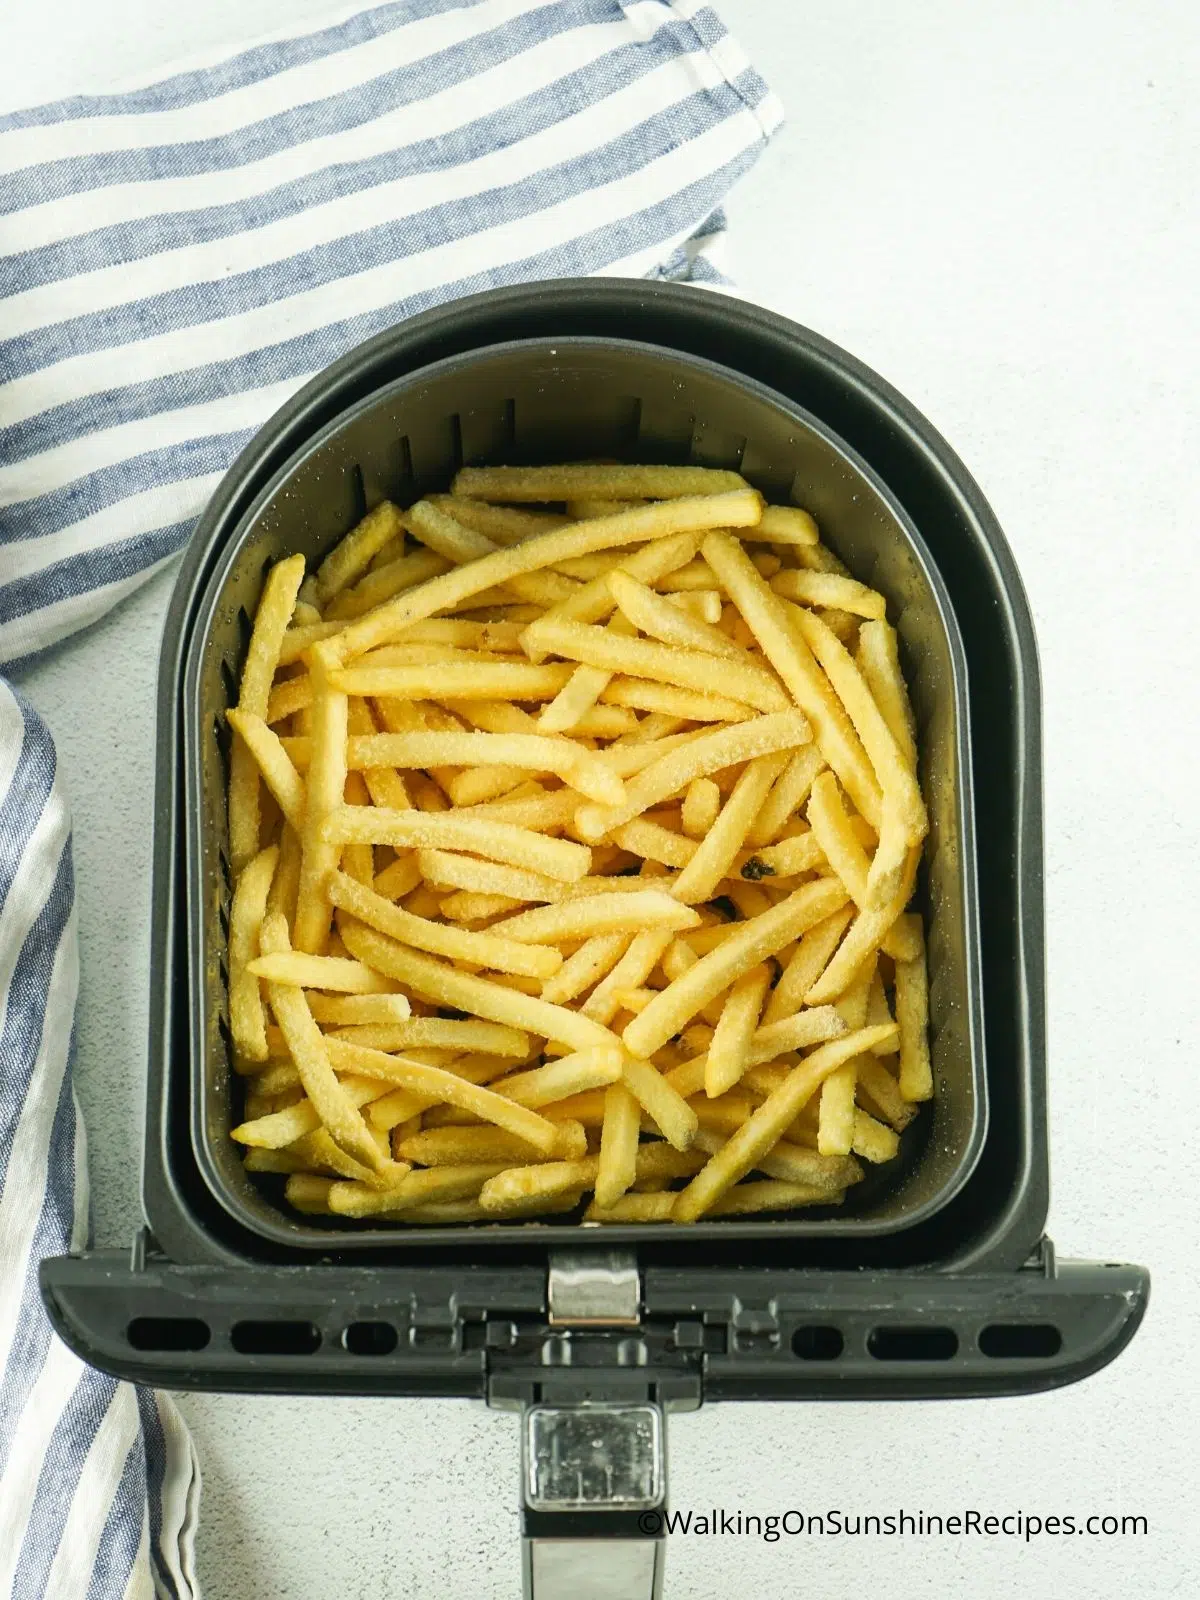 French fries in air fryer basket before baking.